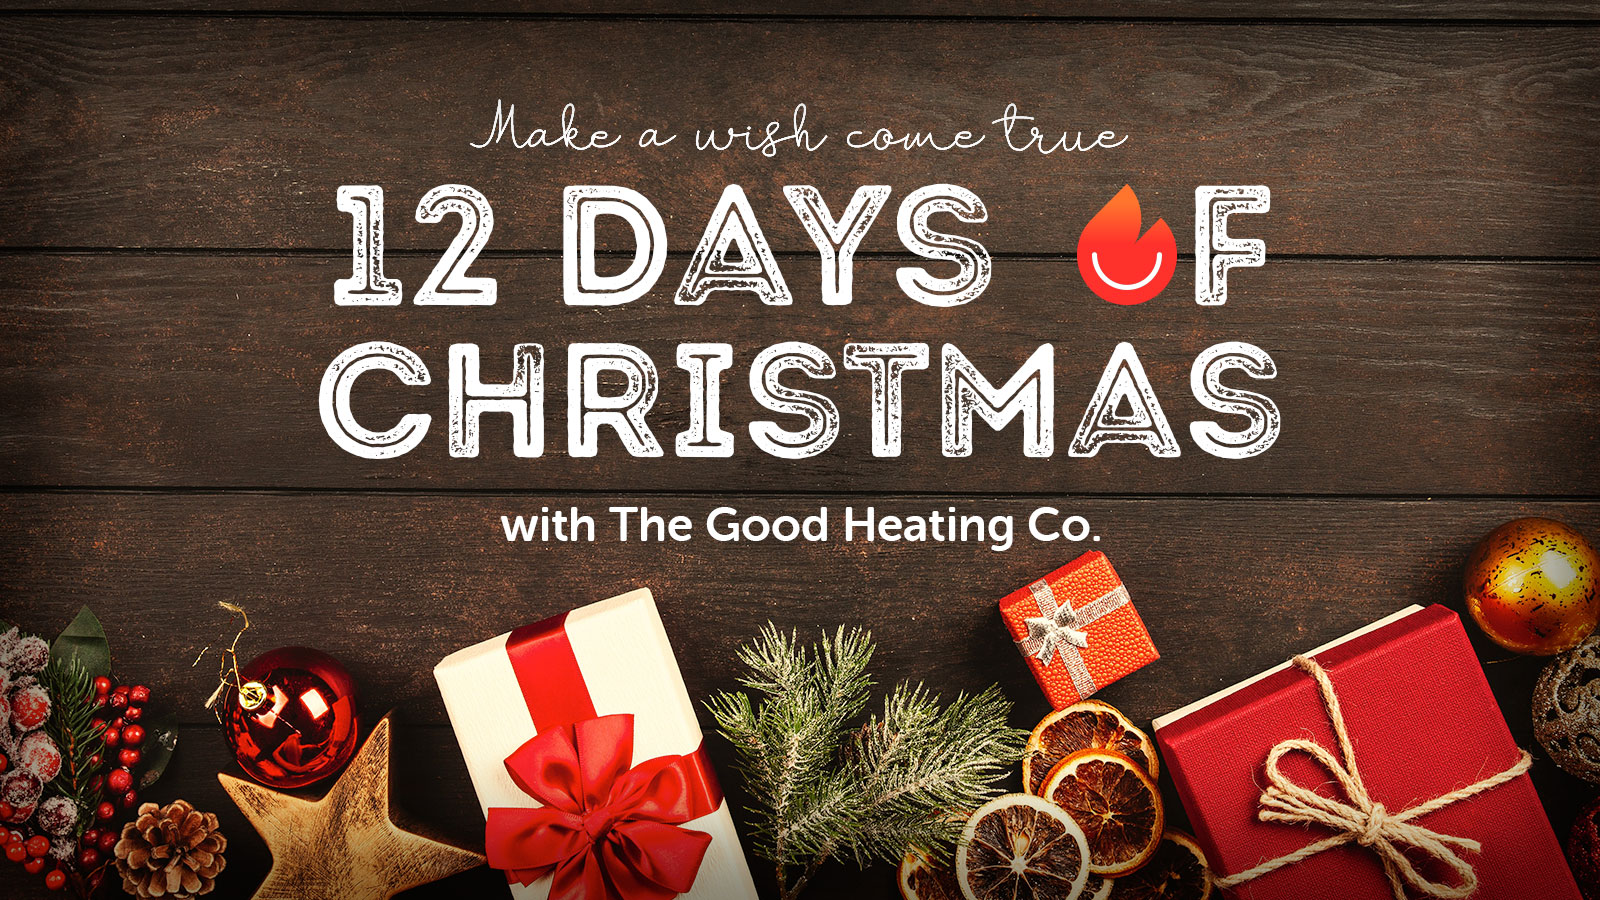 12 Days of Christmas with The Good Heating Co.